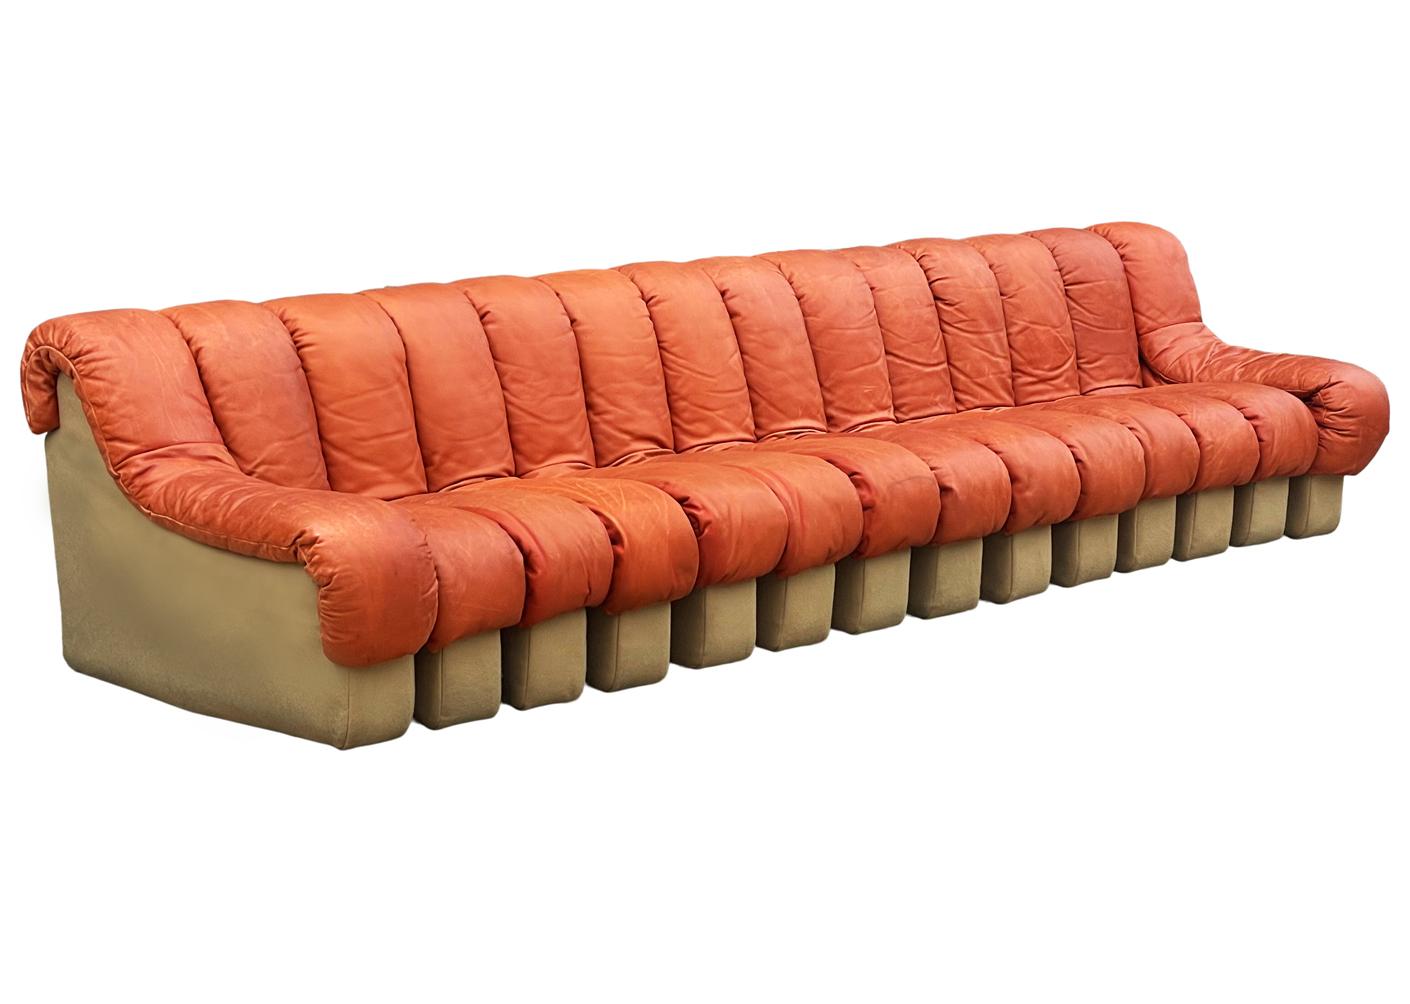 Mid-Century Modern De Sede 600 Nonstop Curved Leather Sectional Sofa in Cognac 3